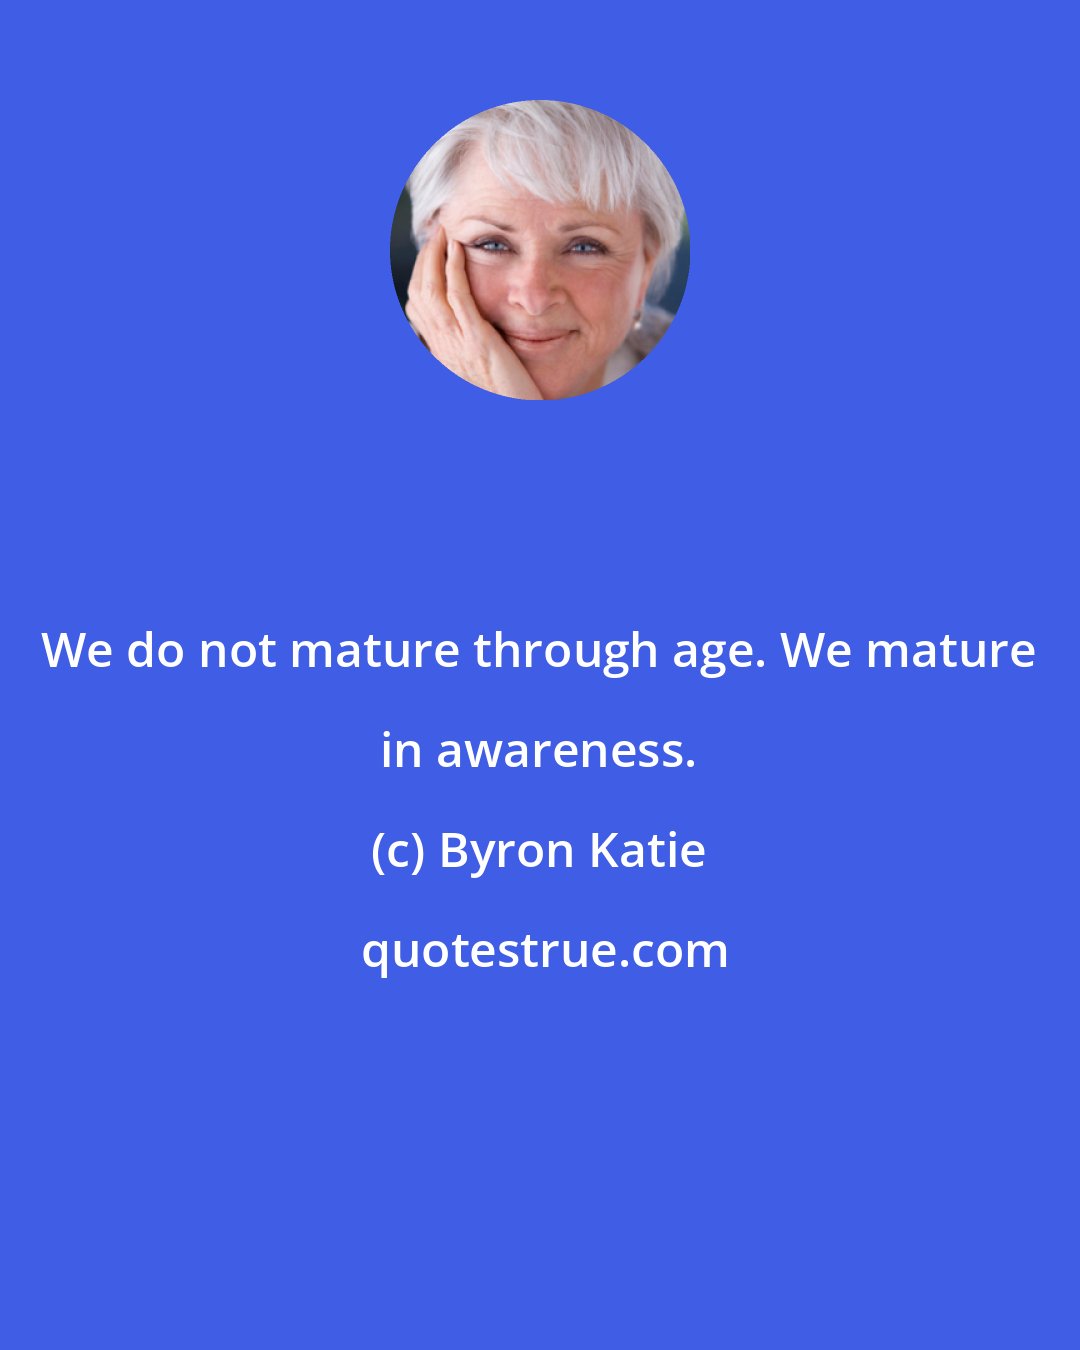 Byron Katie: We do not mature through age. We mature in awareness.